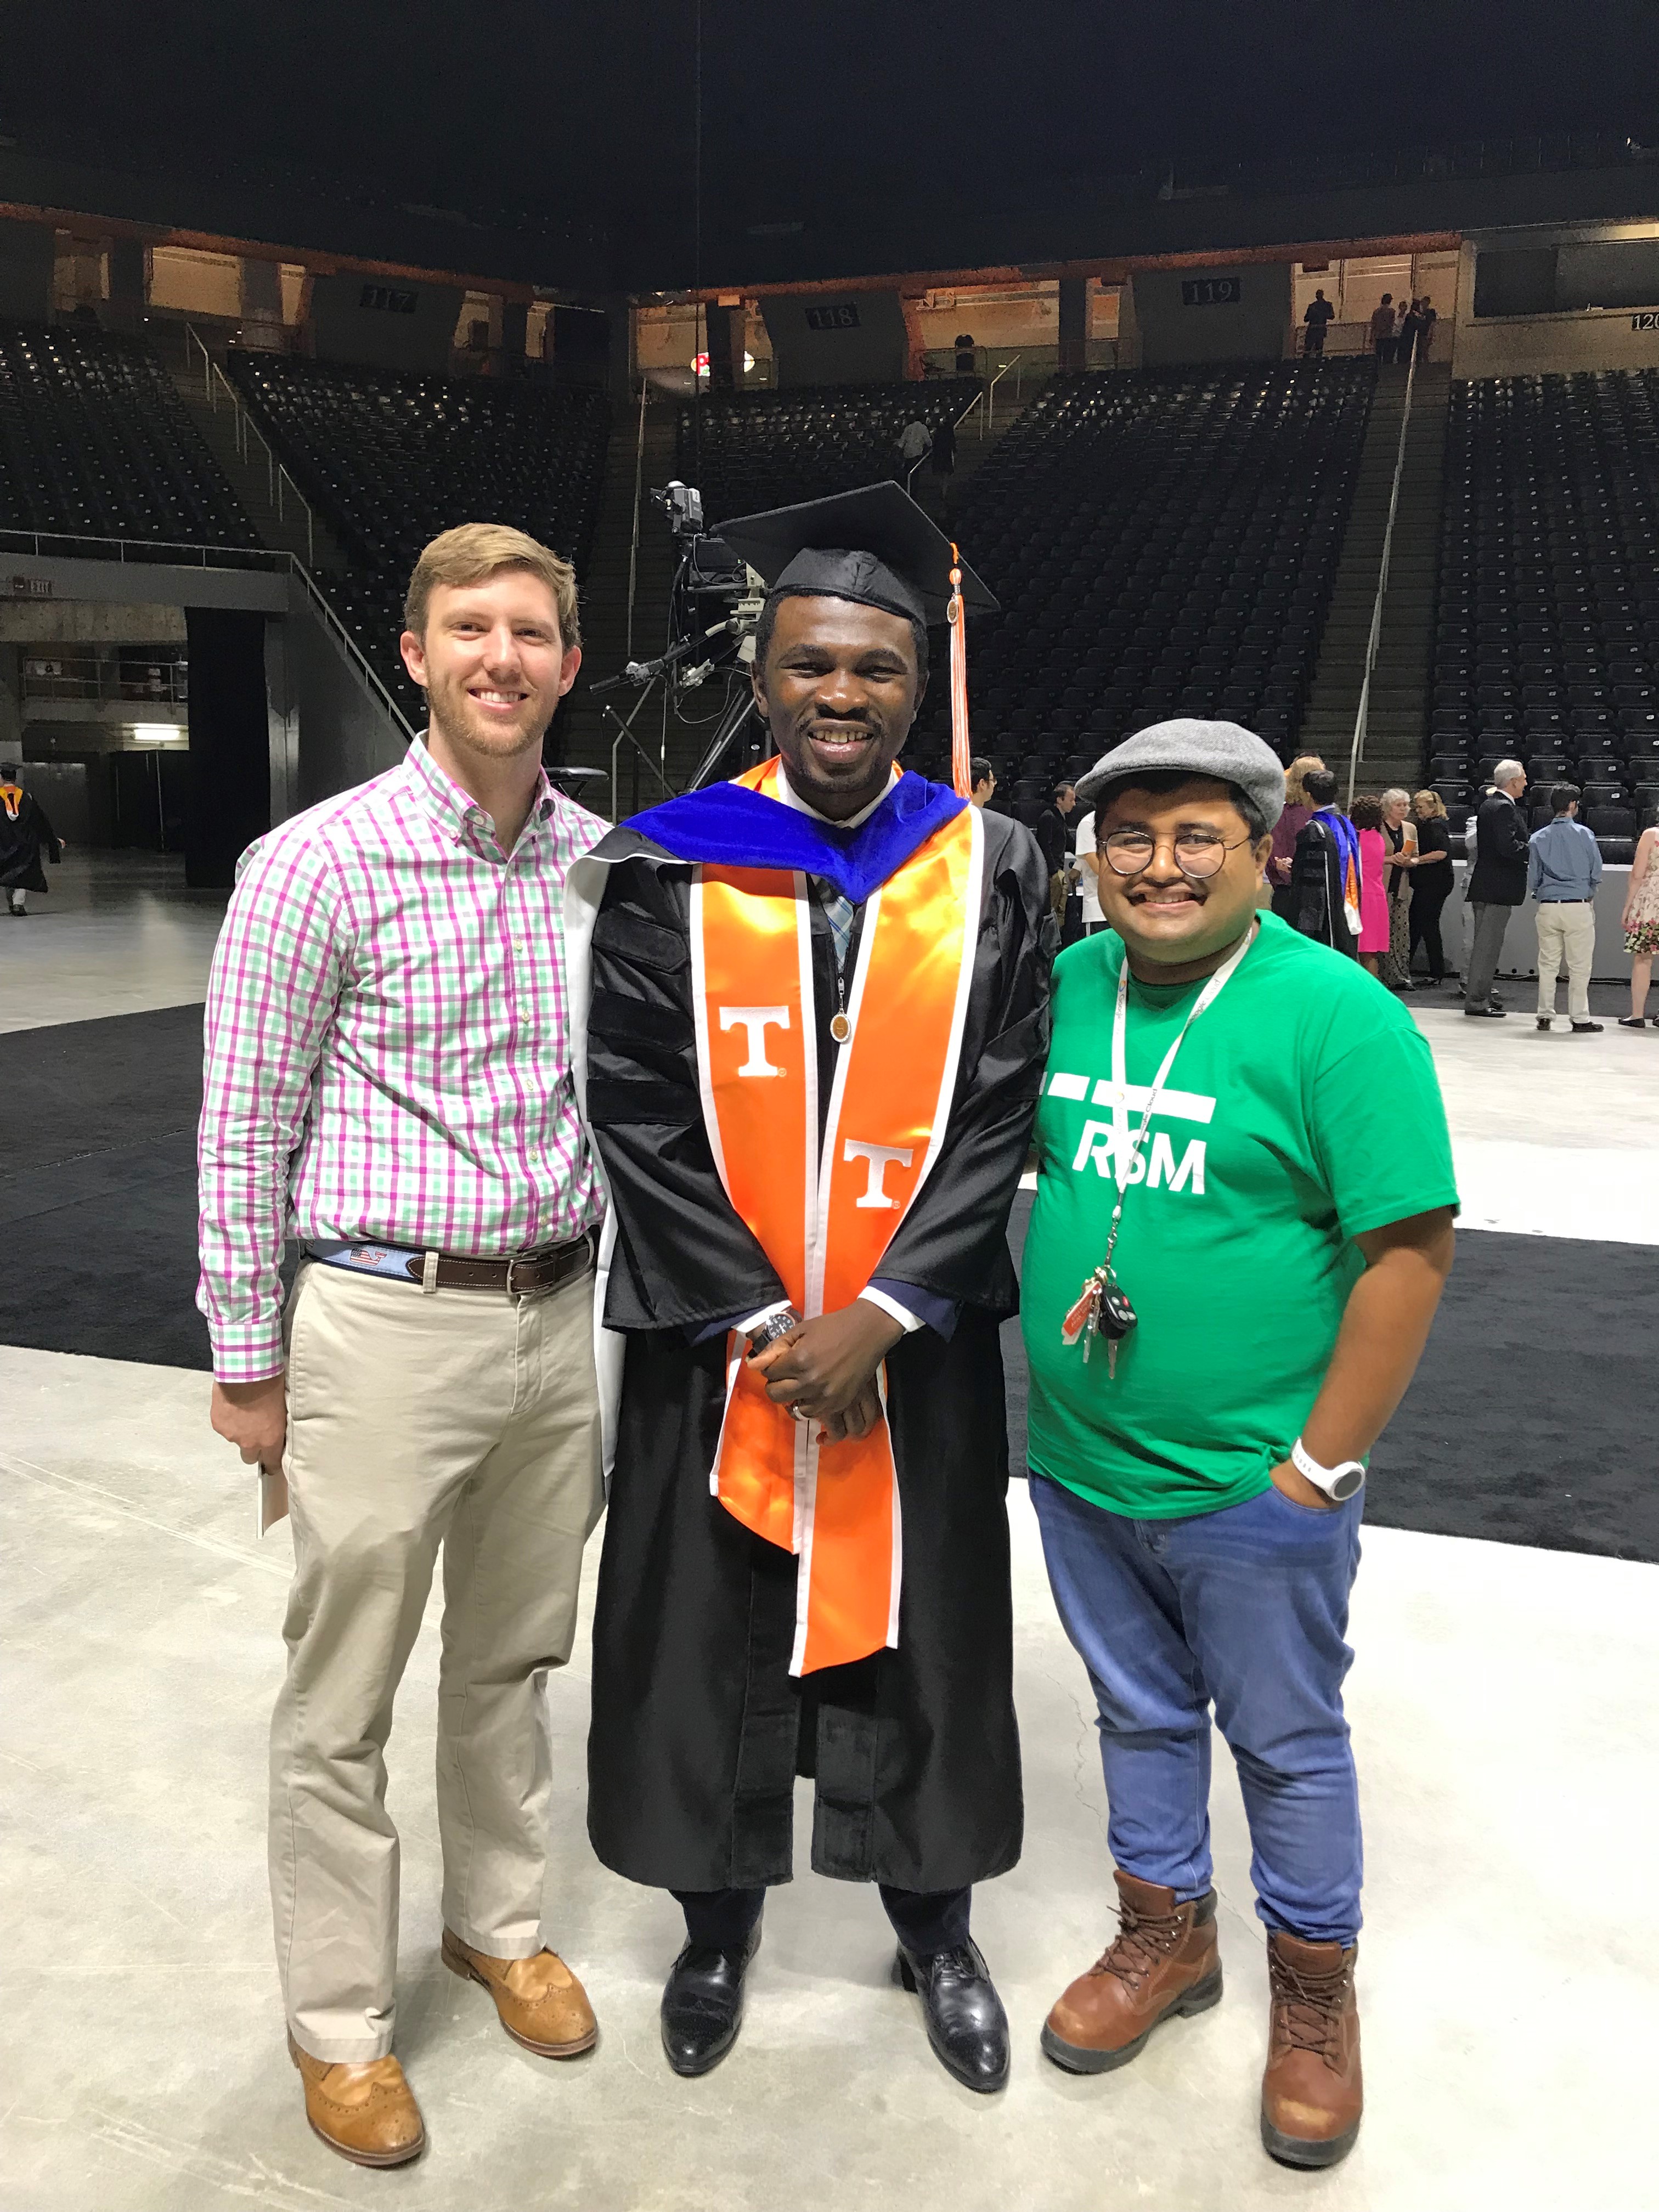 May graduation ceremony - Femi O. becomes the first Ph.D. graduate of our group. Dr. Oyedeji is now working at Oak Ridge National Lab.